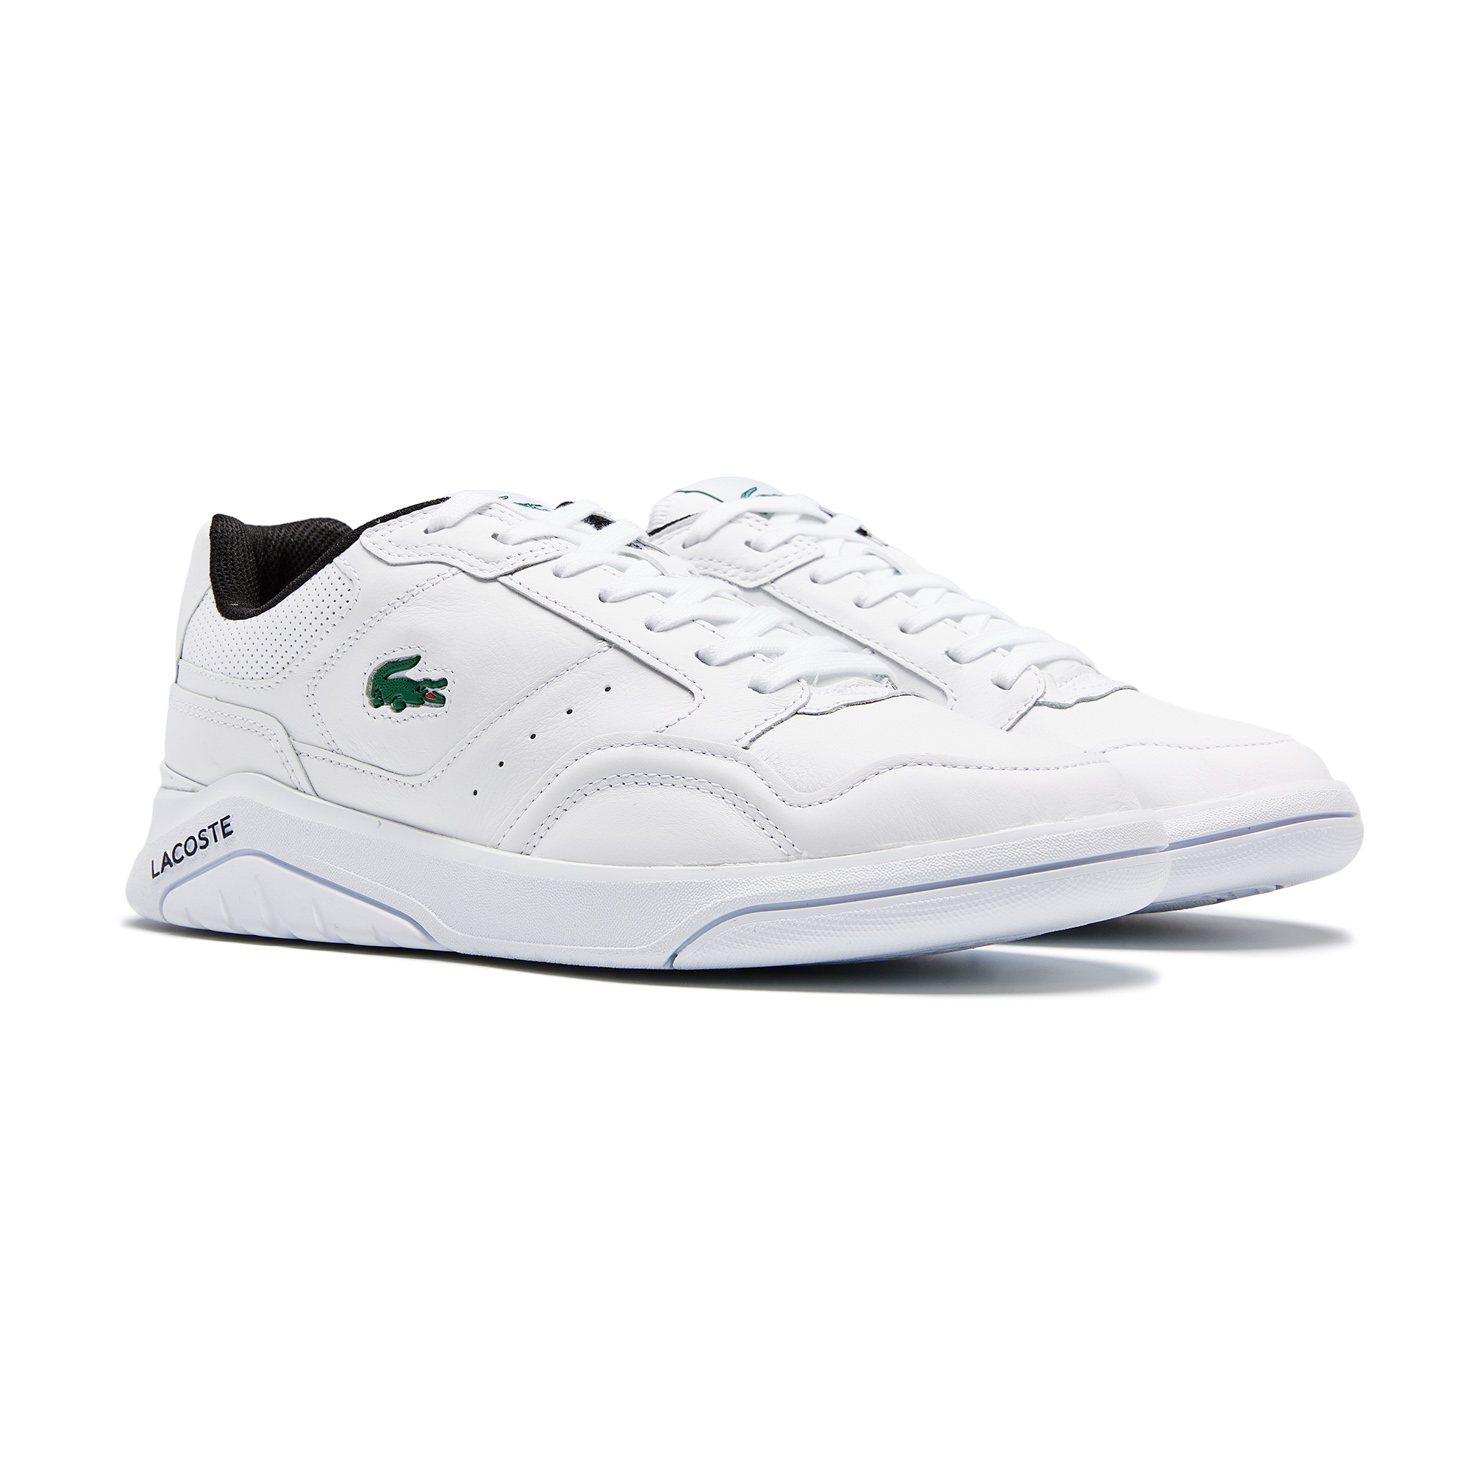 GAME ADVANCE LUXE LACOSTE, размер 40, цвет белый 742SMA0013 - фото 2